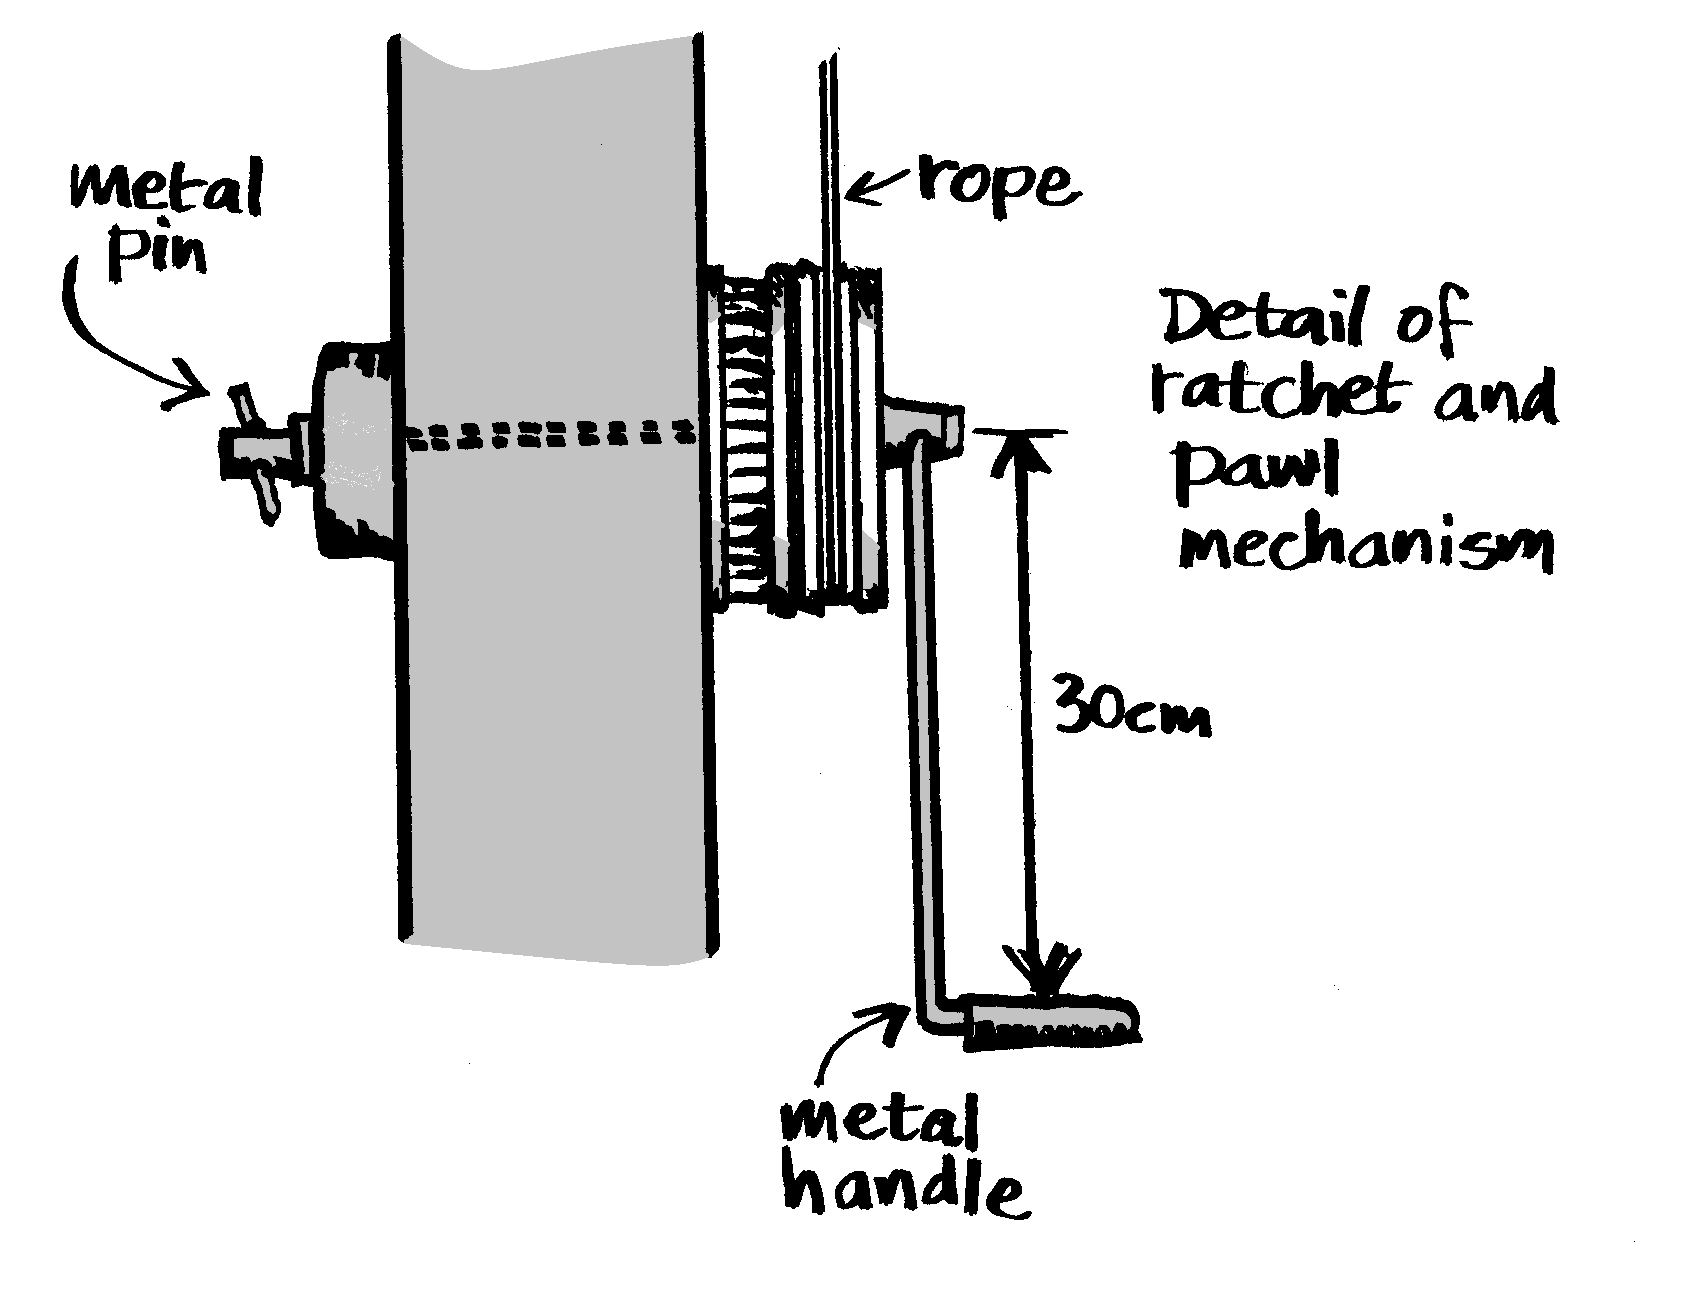 A graphic desing of a well lifting mechanism 